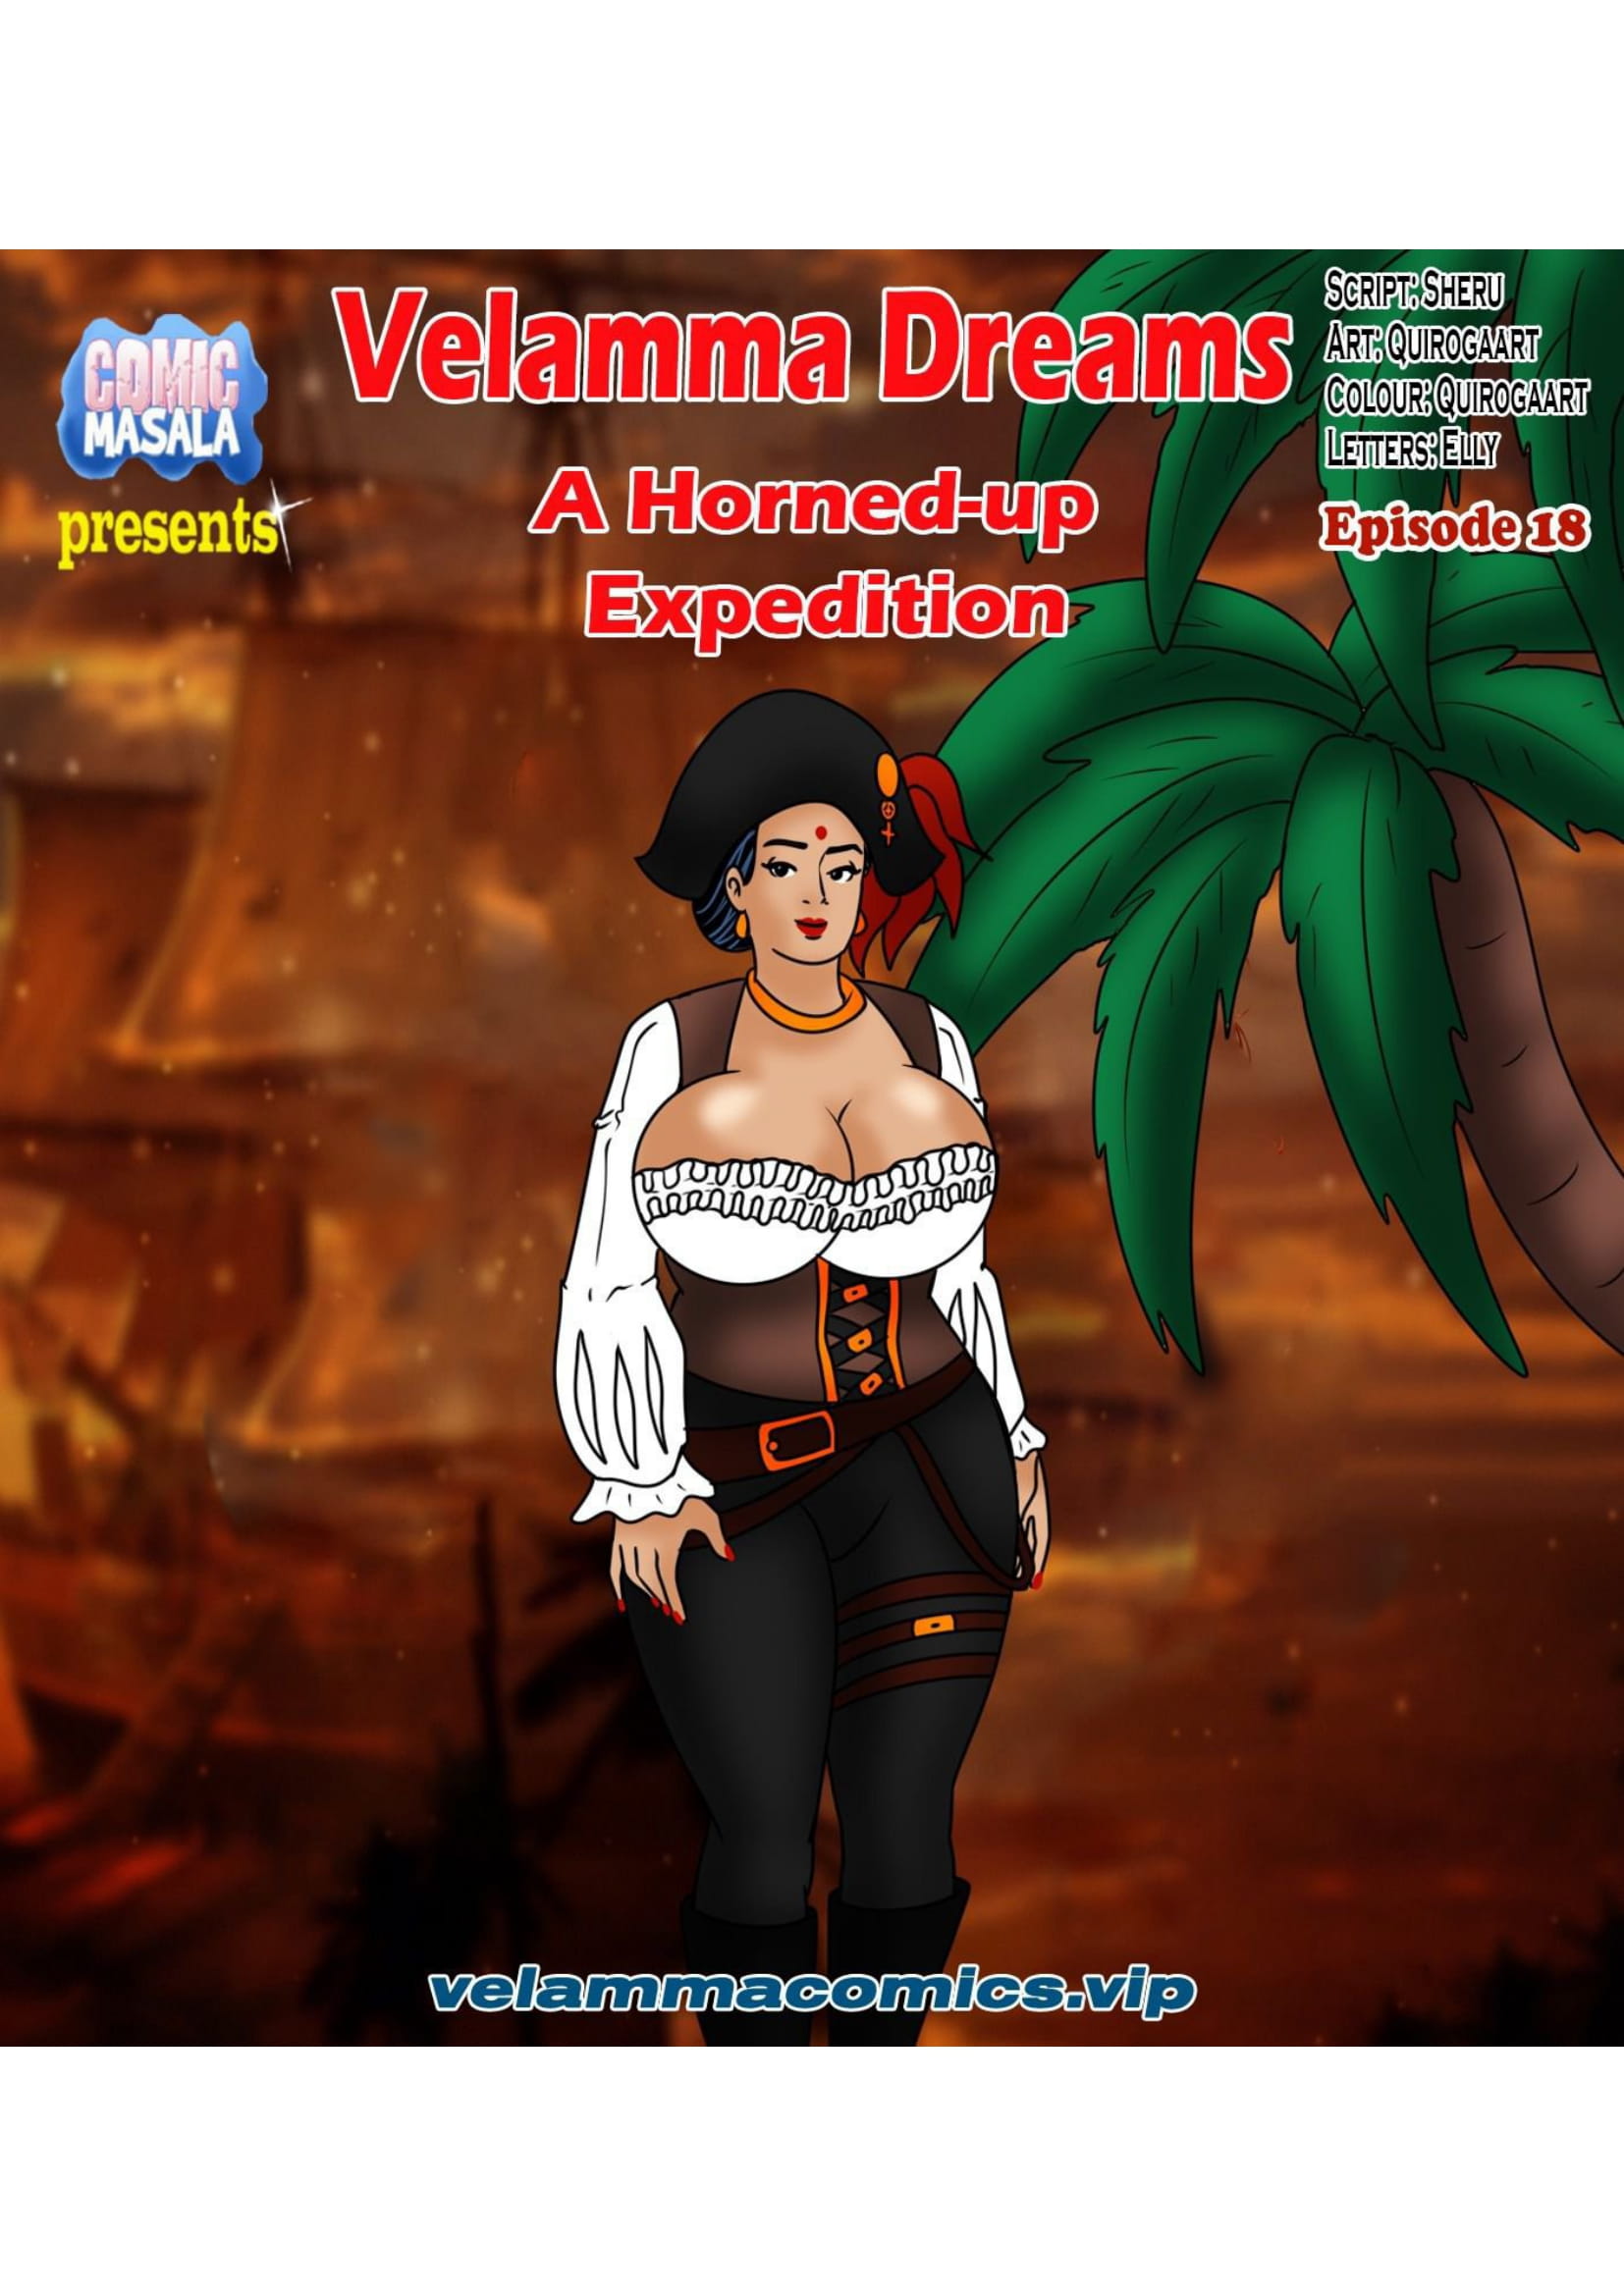 Velamma Dreams Episode 18 English - A Horned up Expedition - 7 - FSIComics